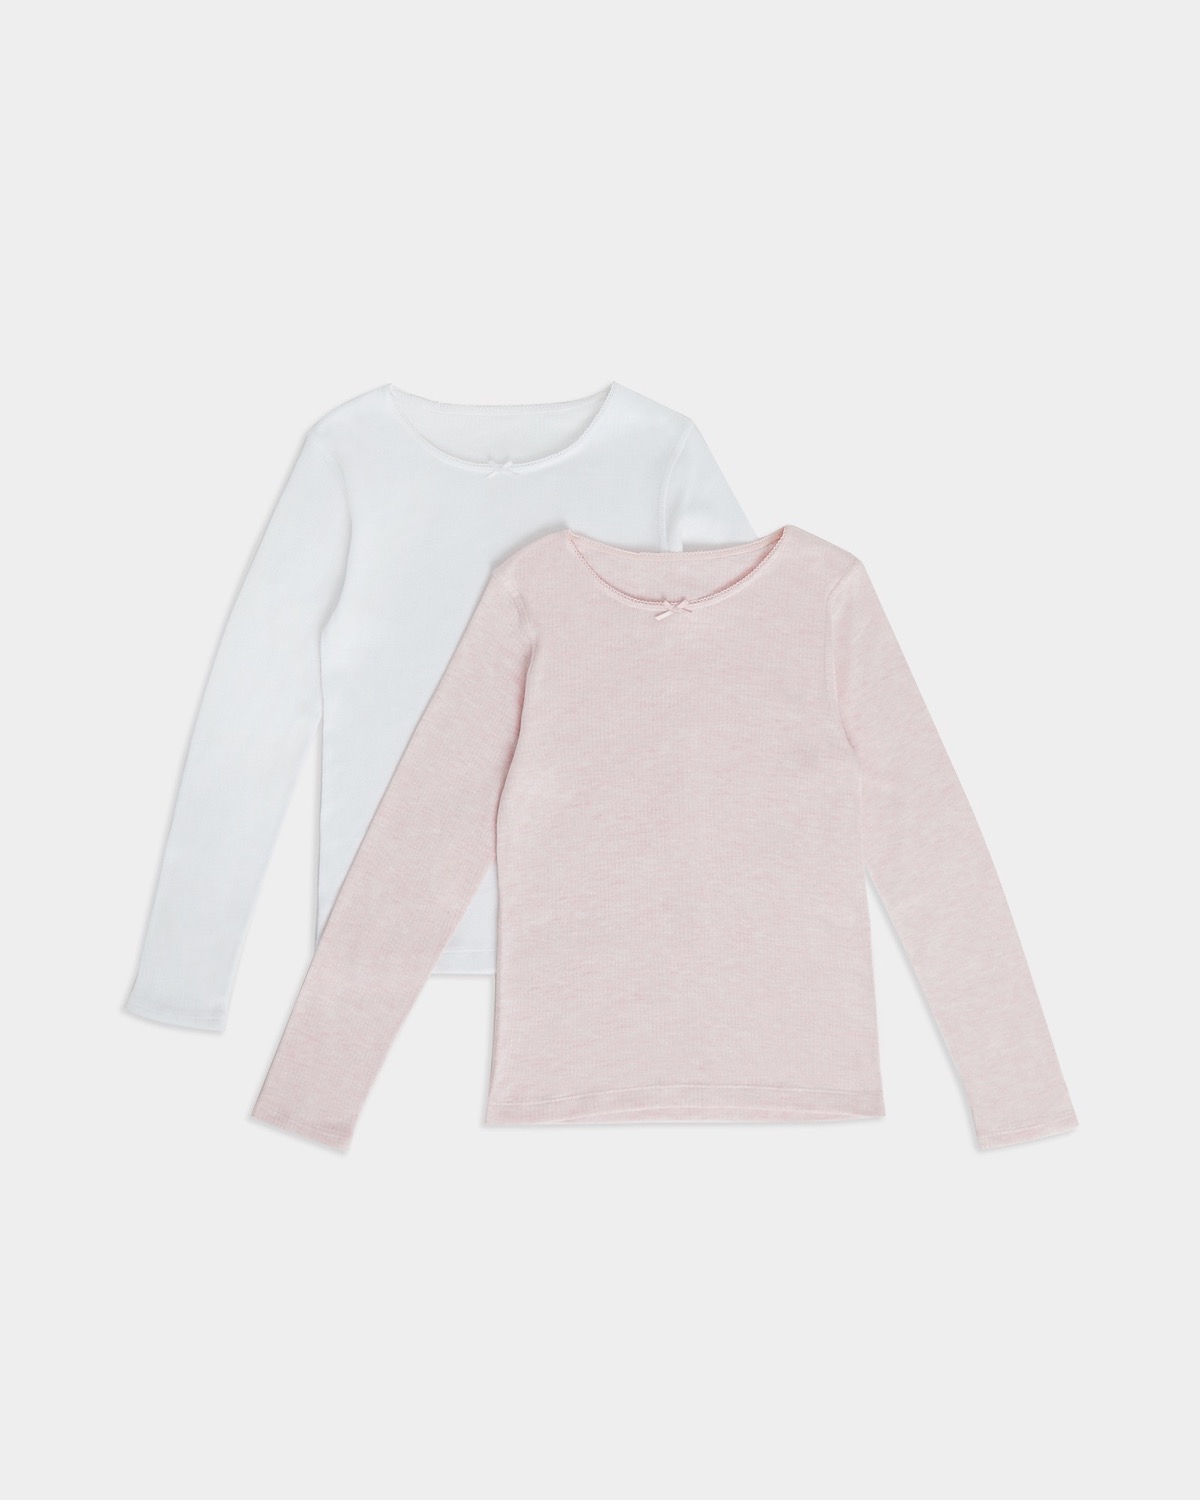 Dunnes Stores  Pink-marl Girls Thermal Long-Sleeved Tops - Pack Of 2 (2-14  Years)